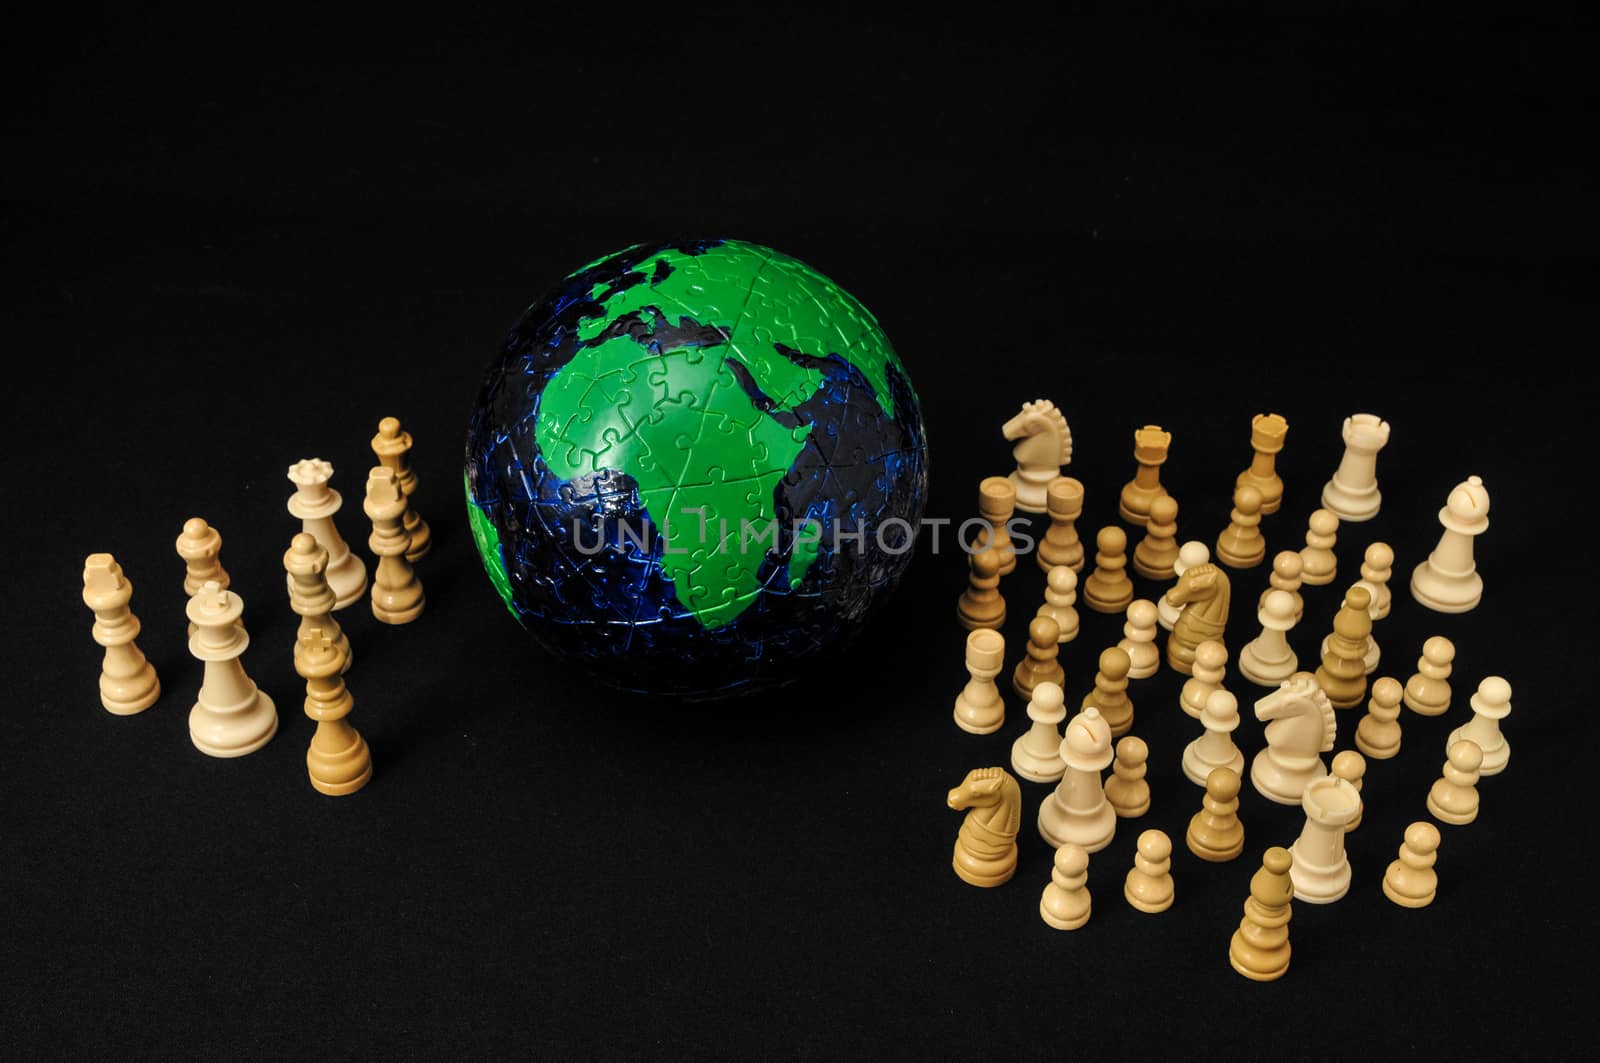 Globe And White Chess on a Black Background